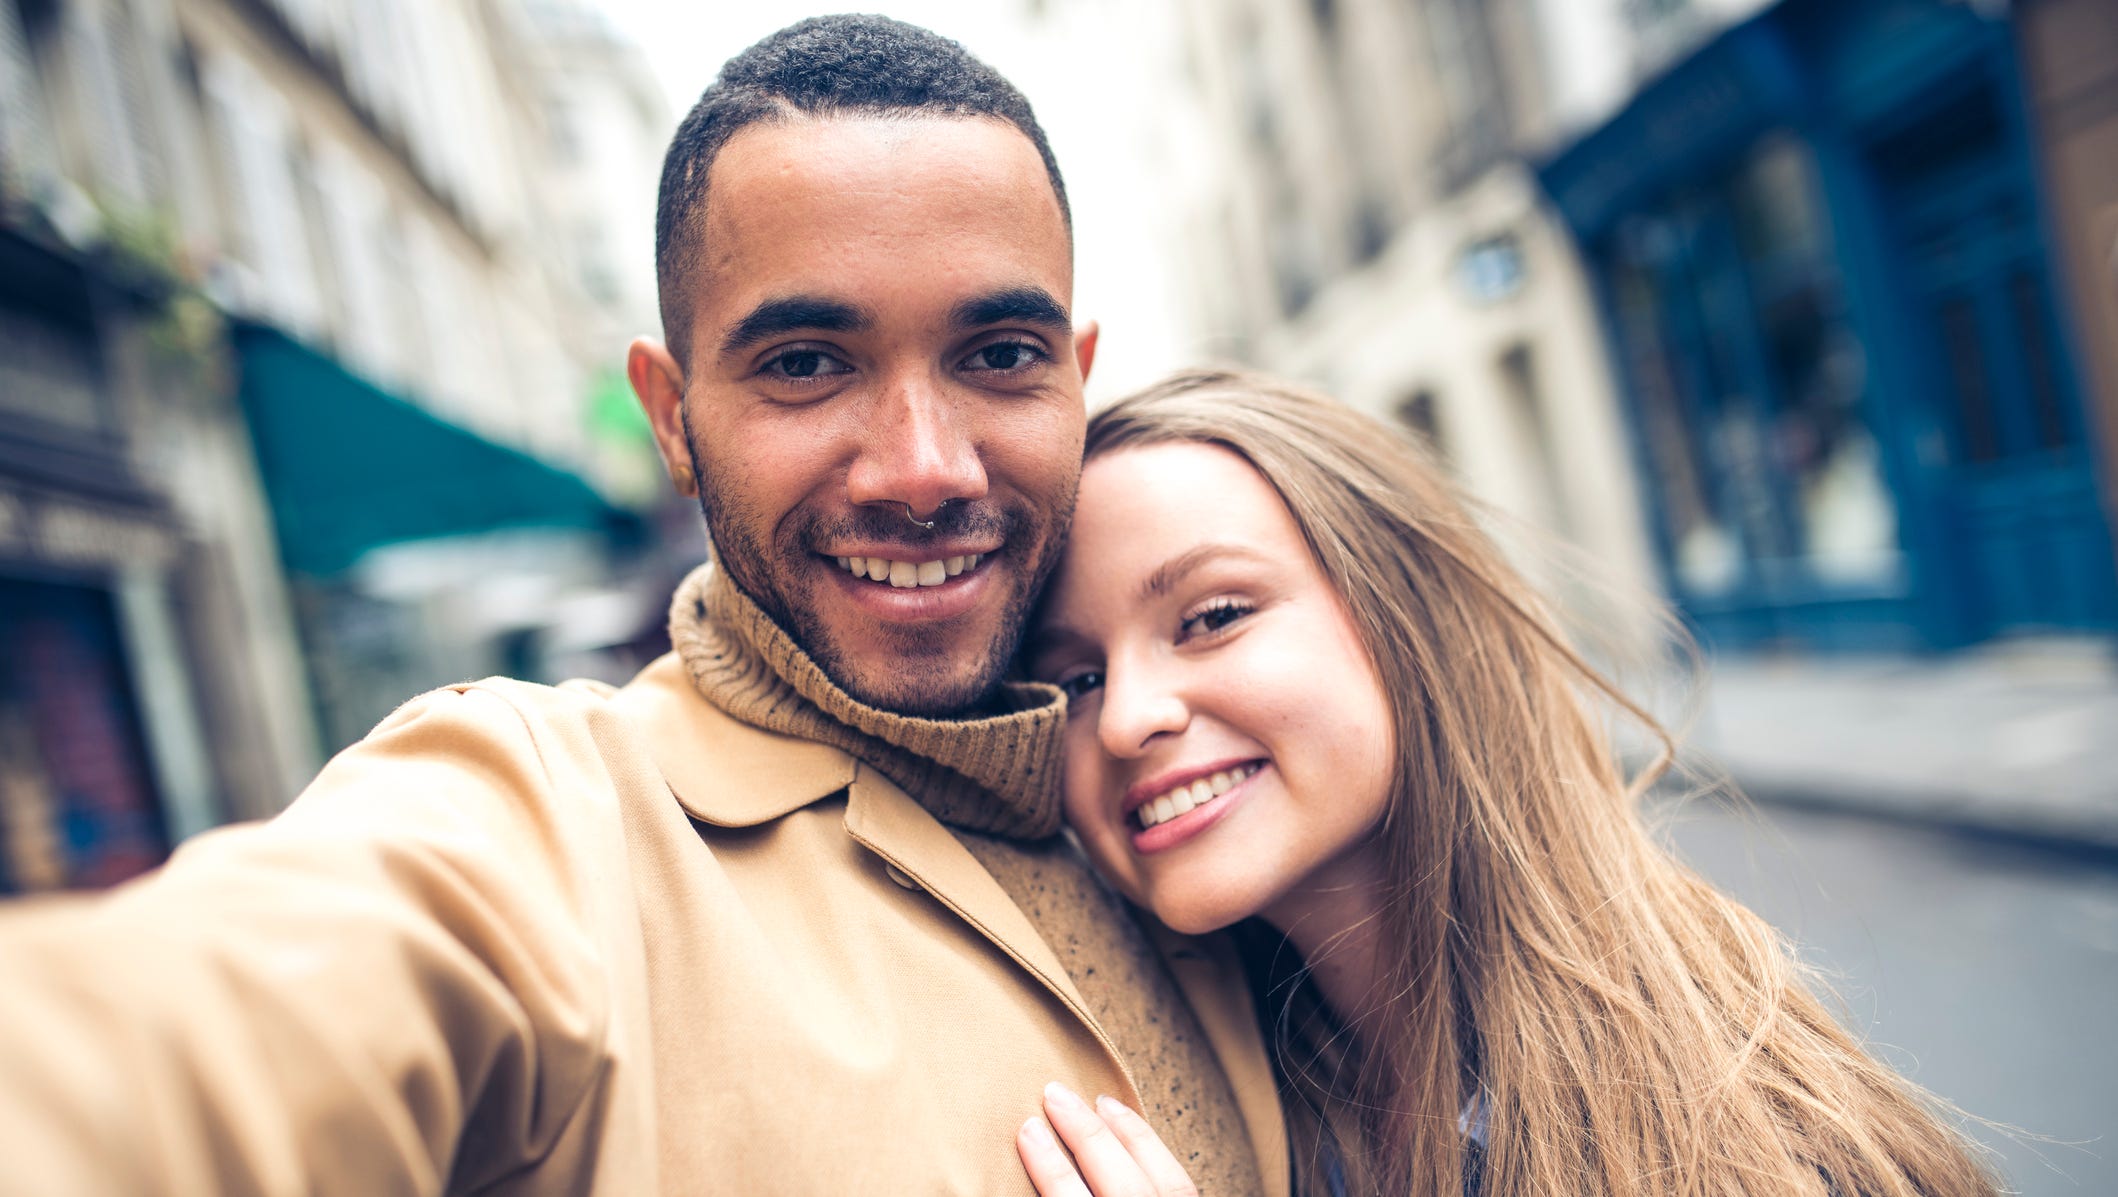 Interracial dating tips in Harare